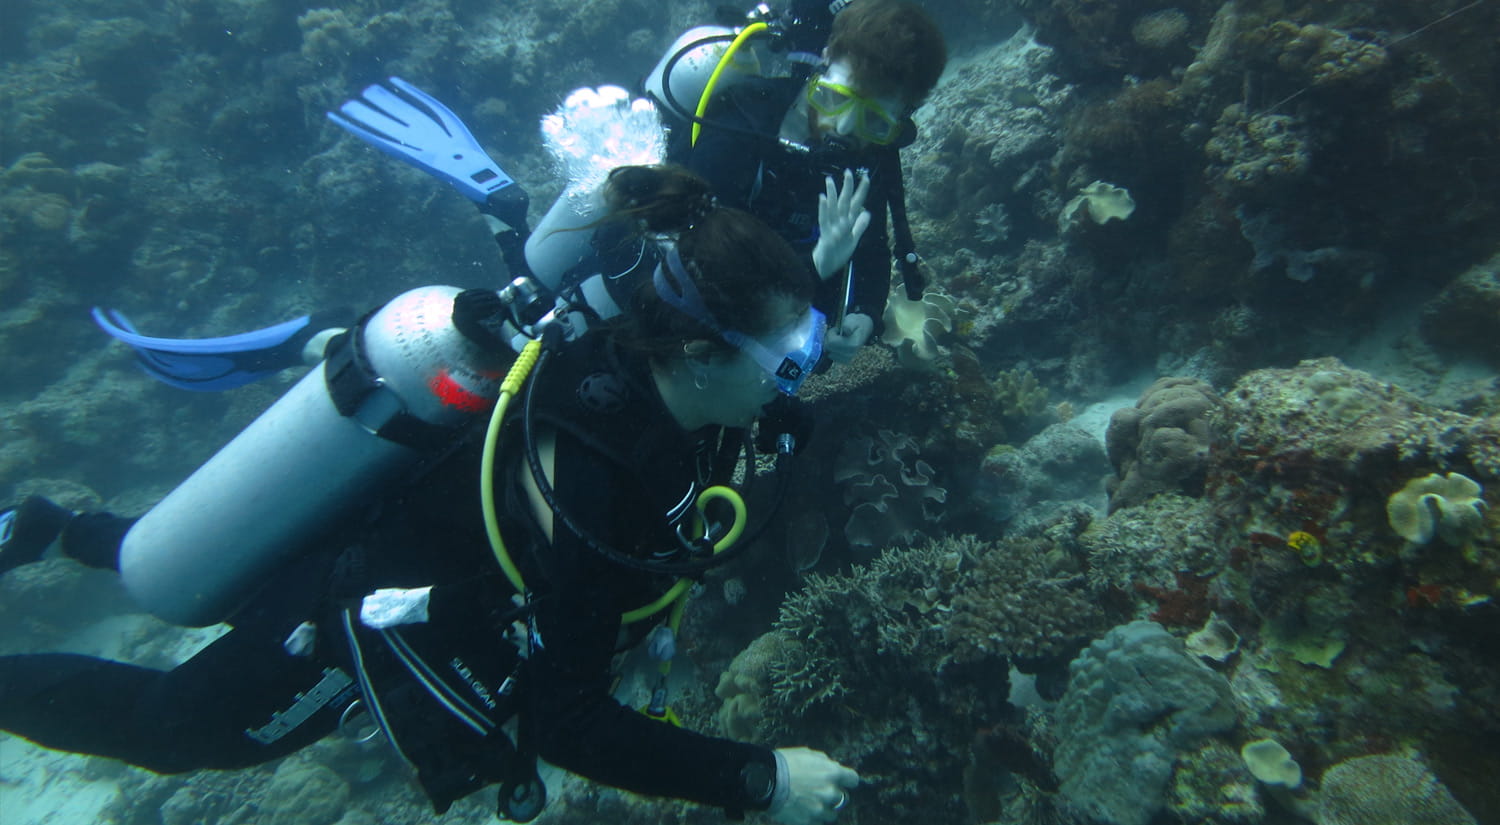 Marine biology students SCUBA diving in the Hoga Island marine conservation area.